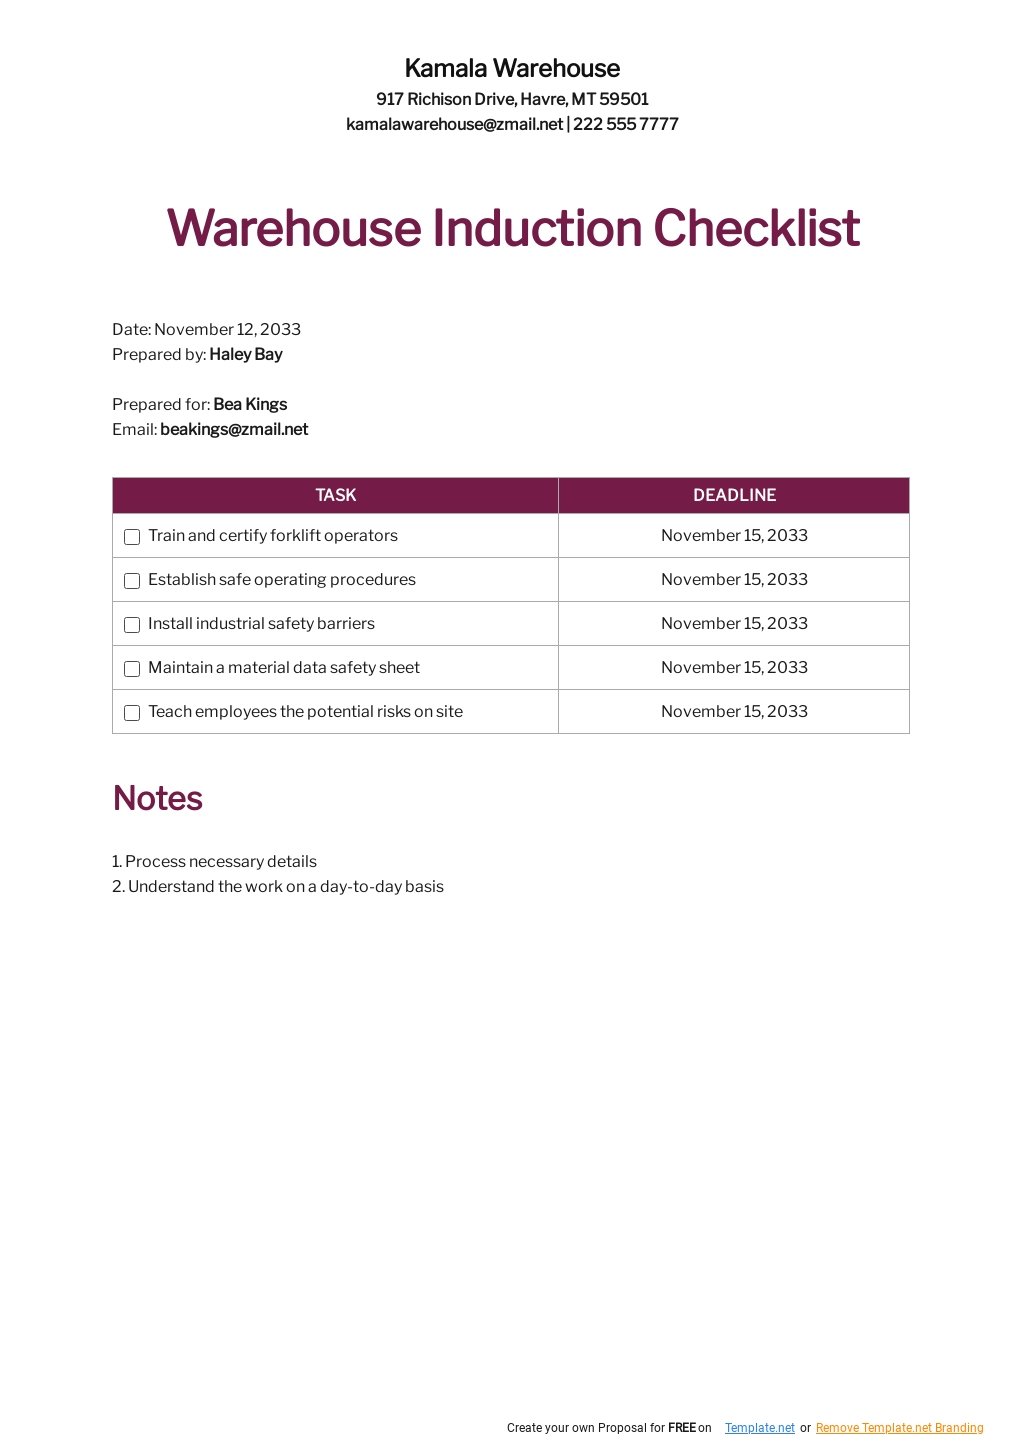 Warehouse Induction Checklist Template